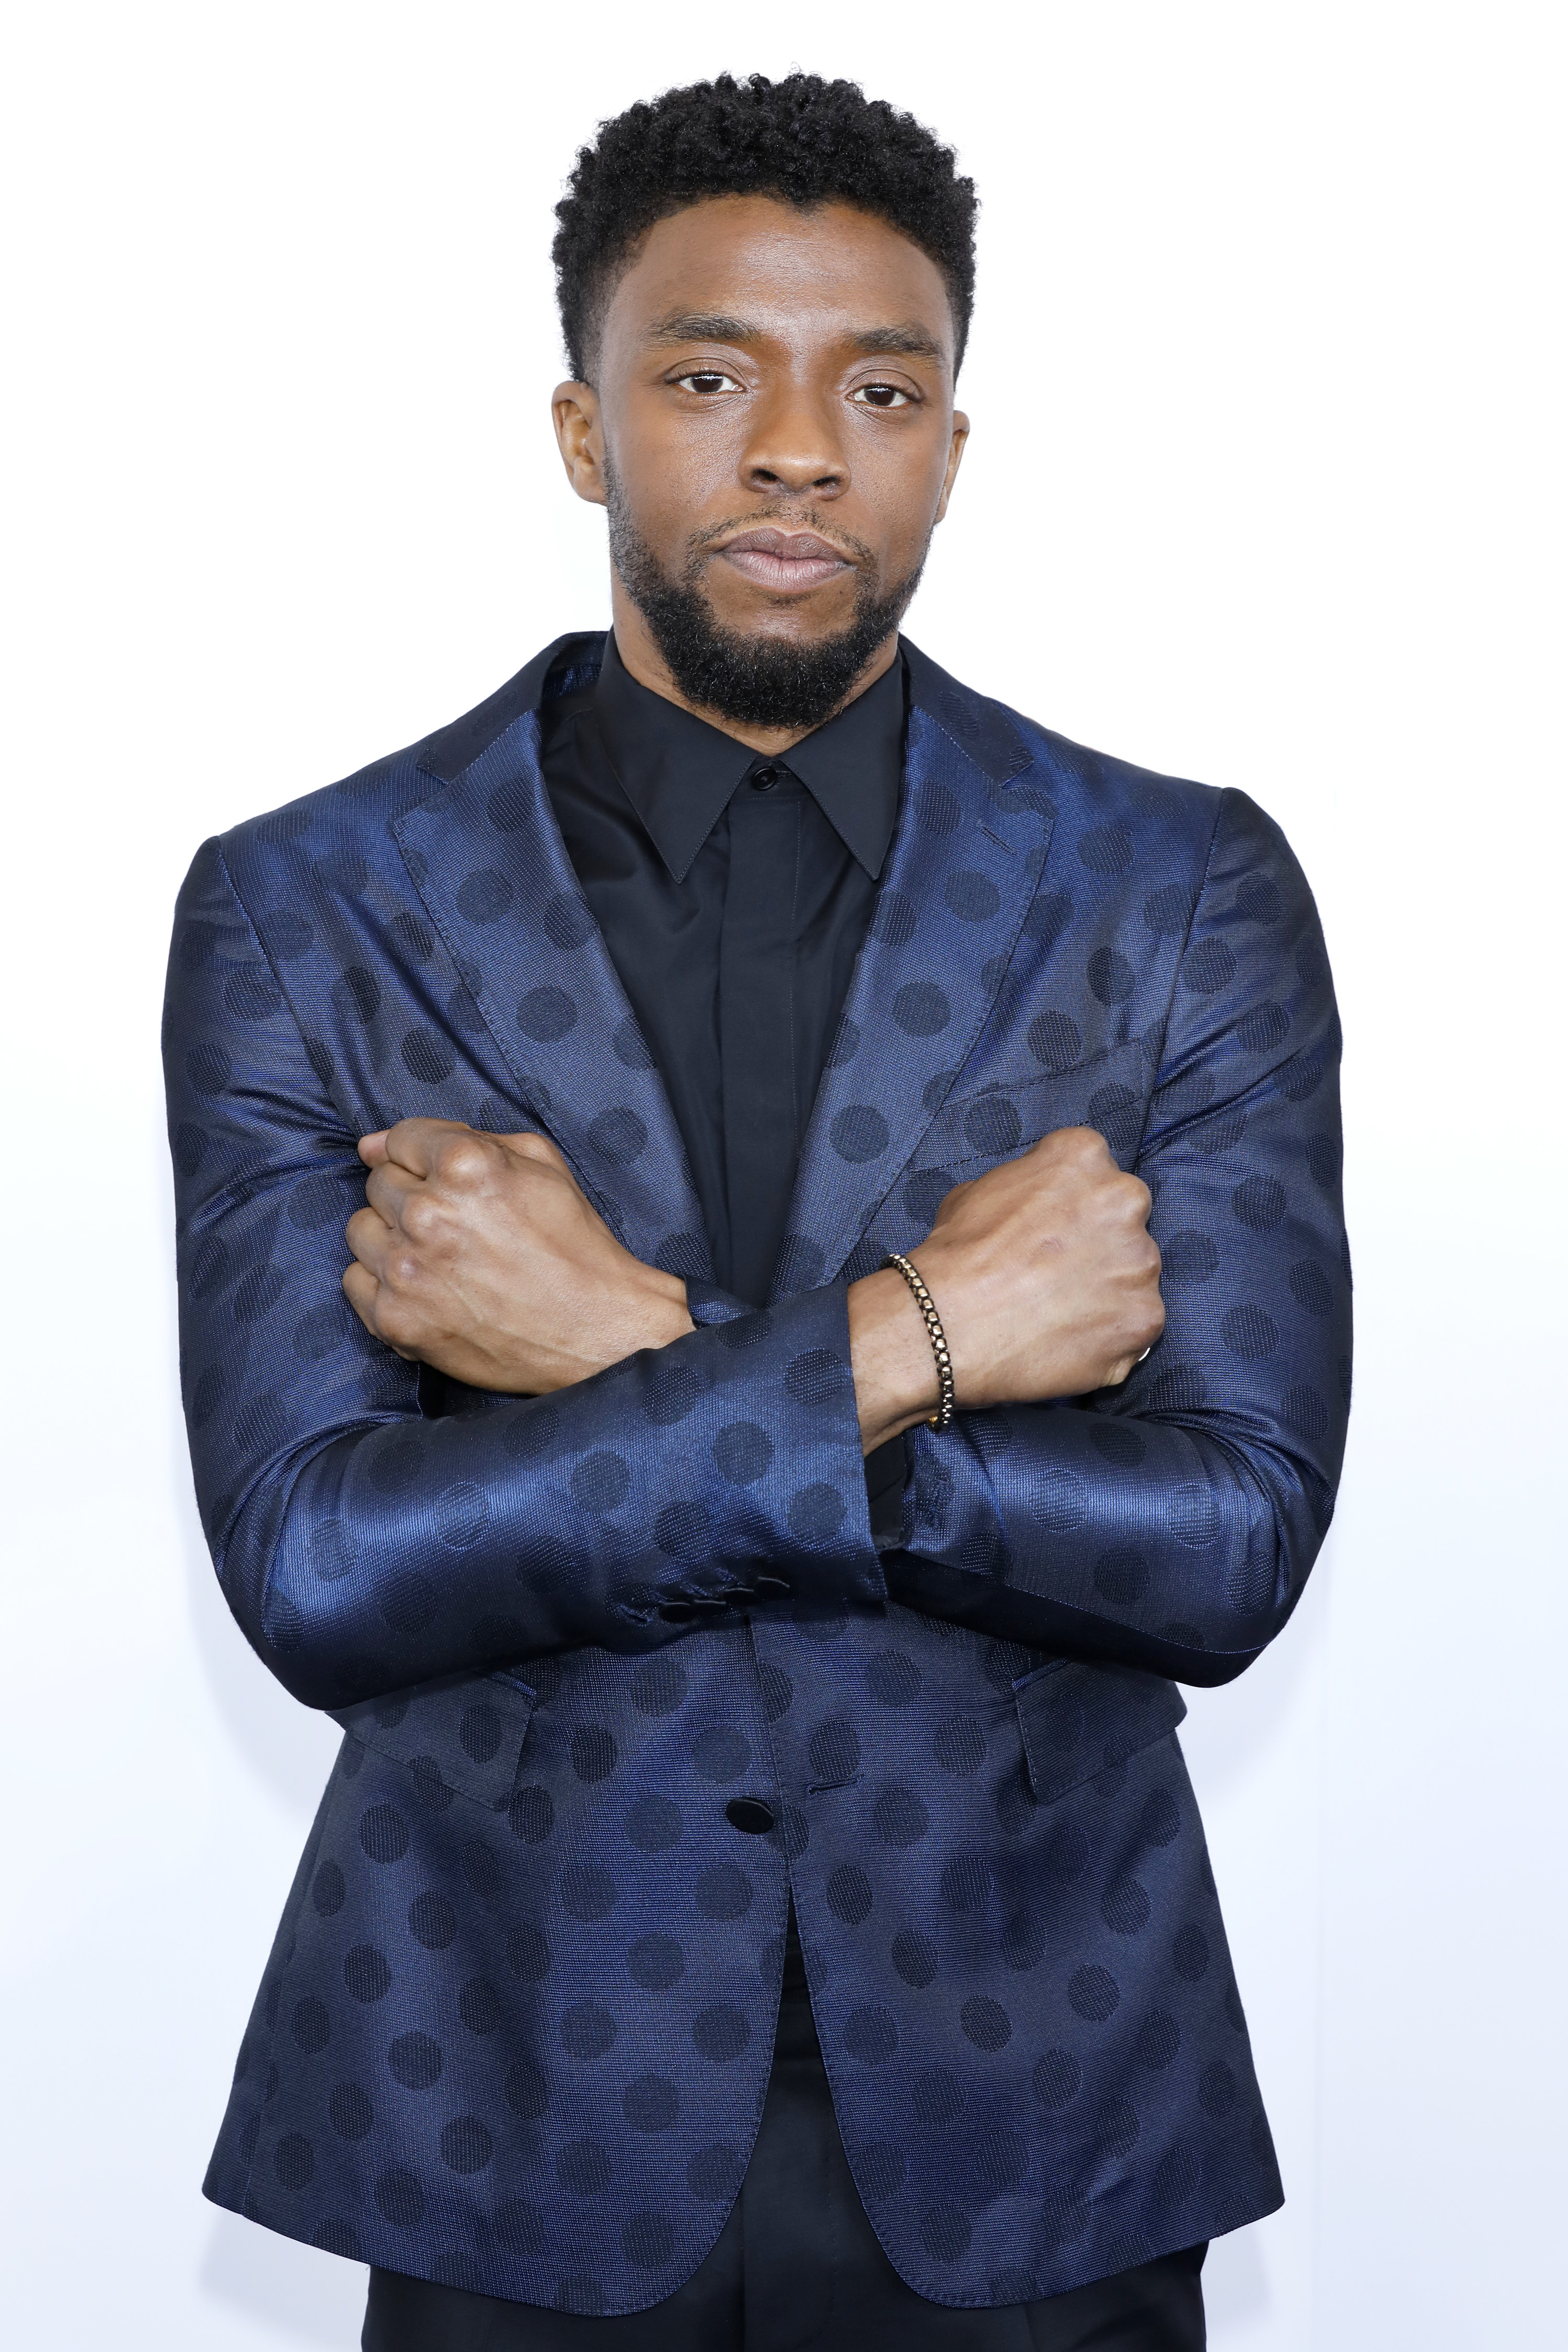 Chadwick Boseman photographed at the 2018 Film Independent Spirit Awards